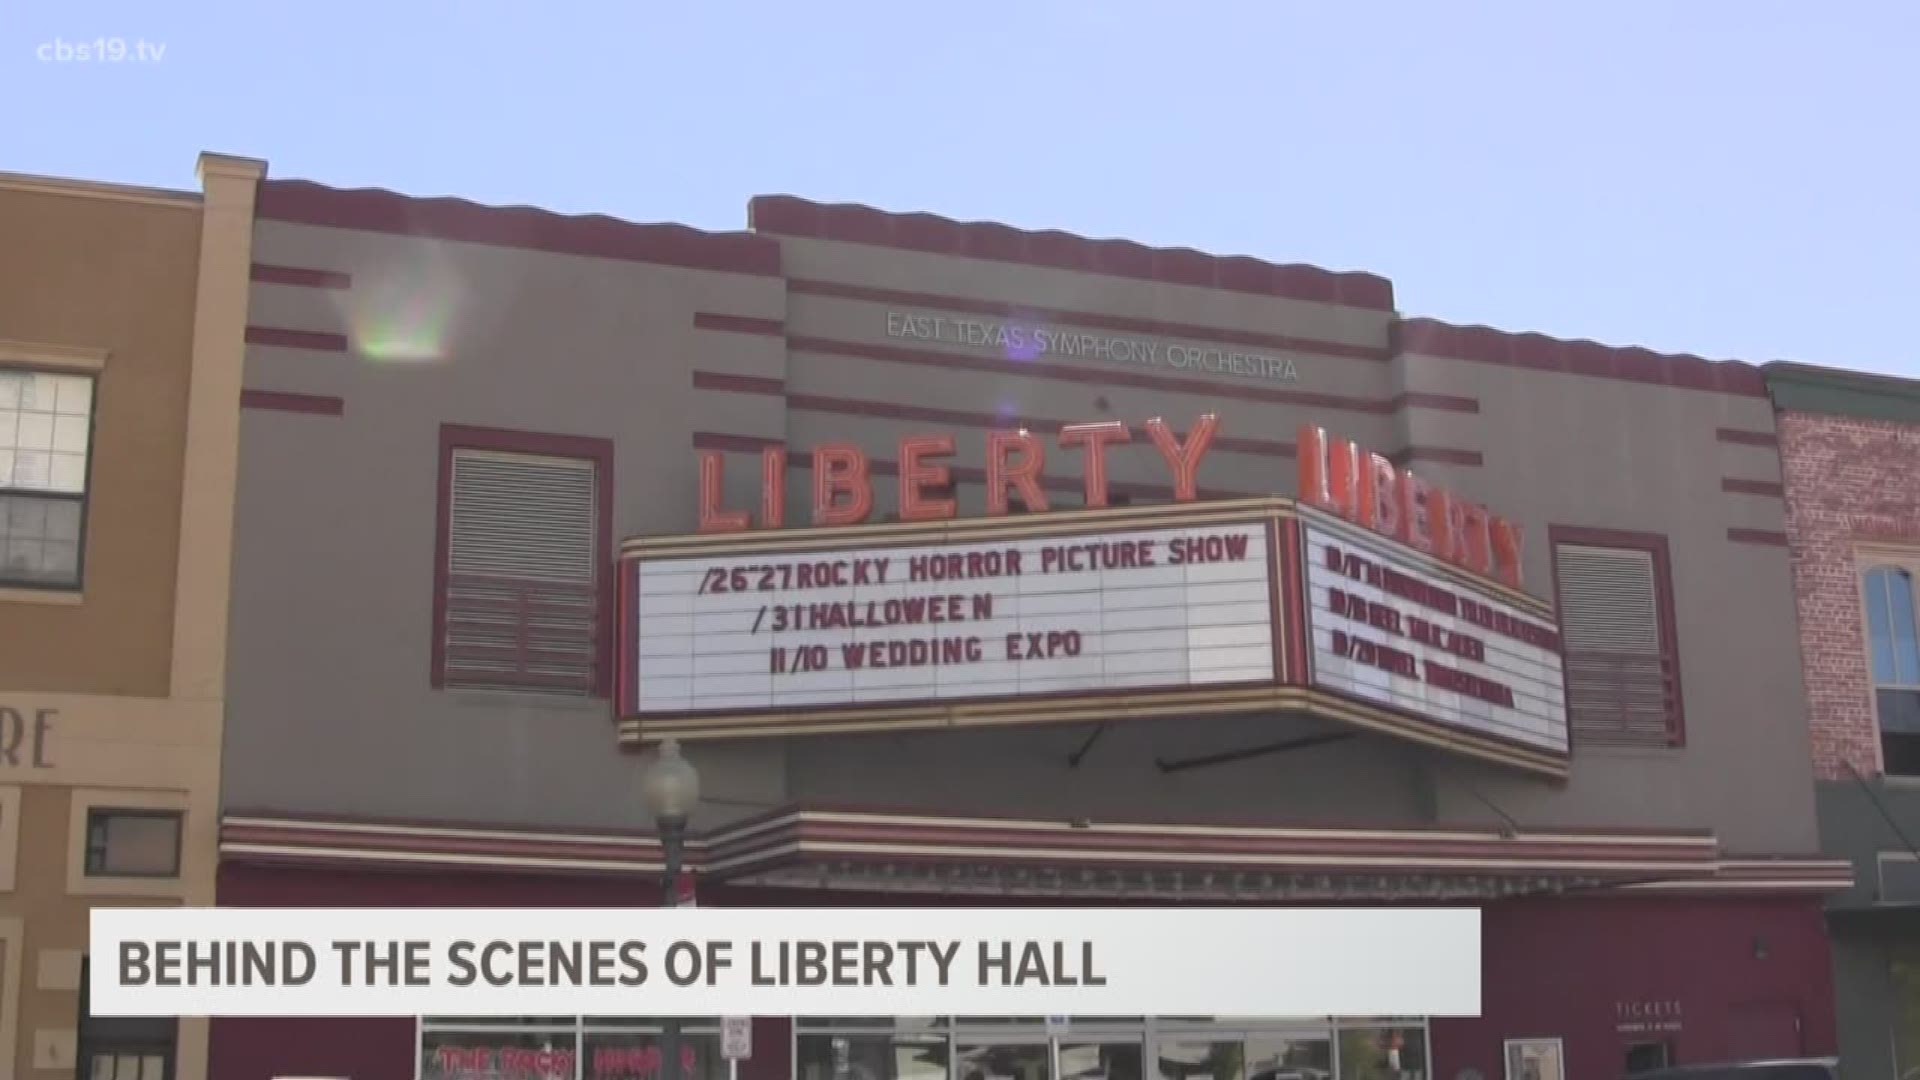 Bryan gets a tour of the historic venue ahead of the Downtown Tyler Film Festival